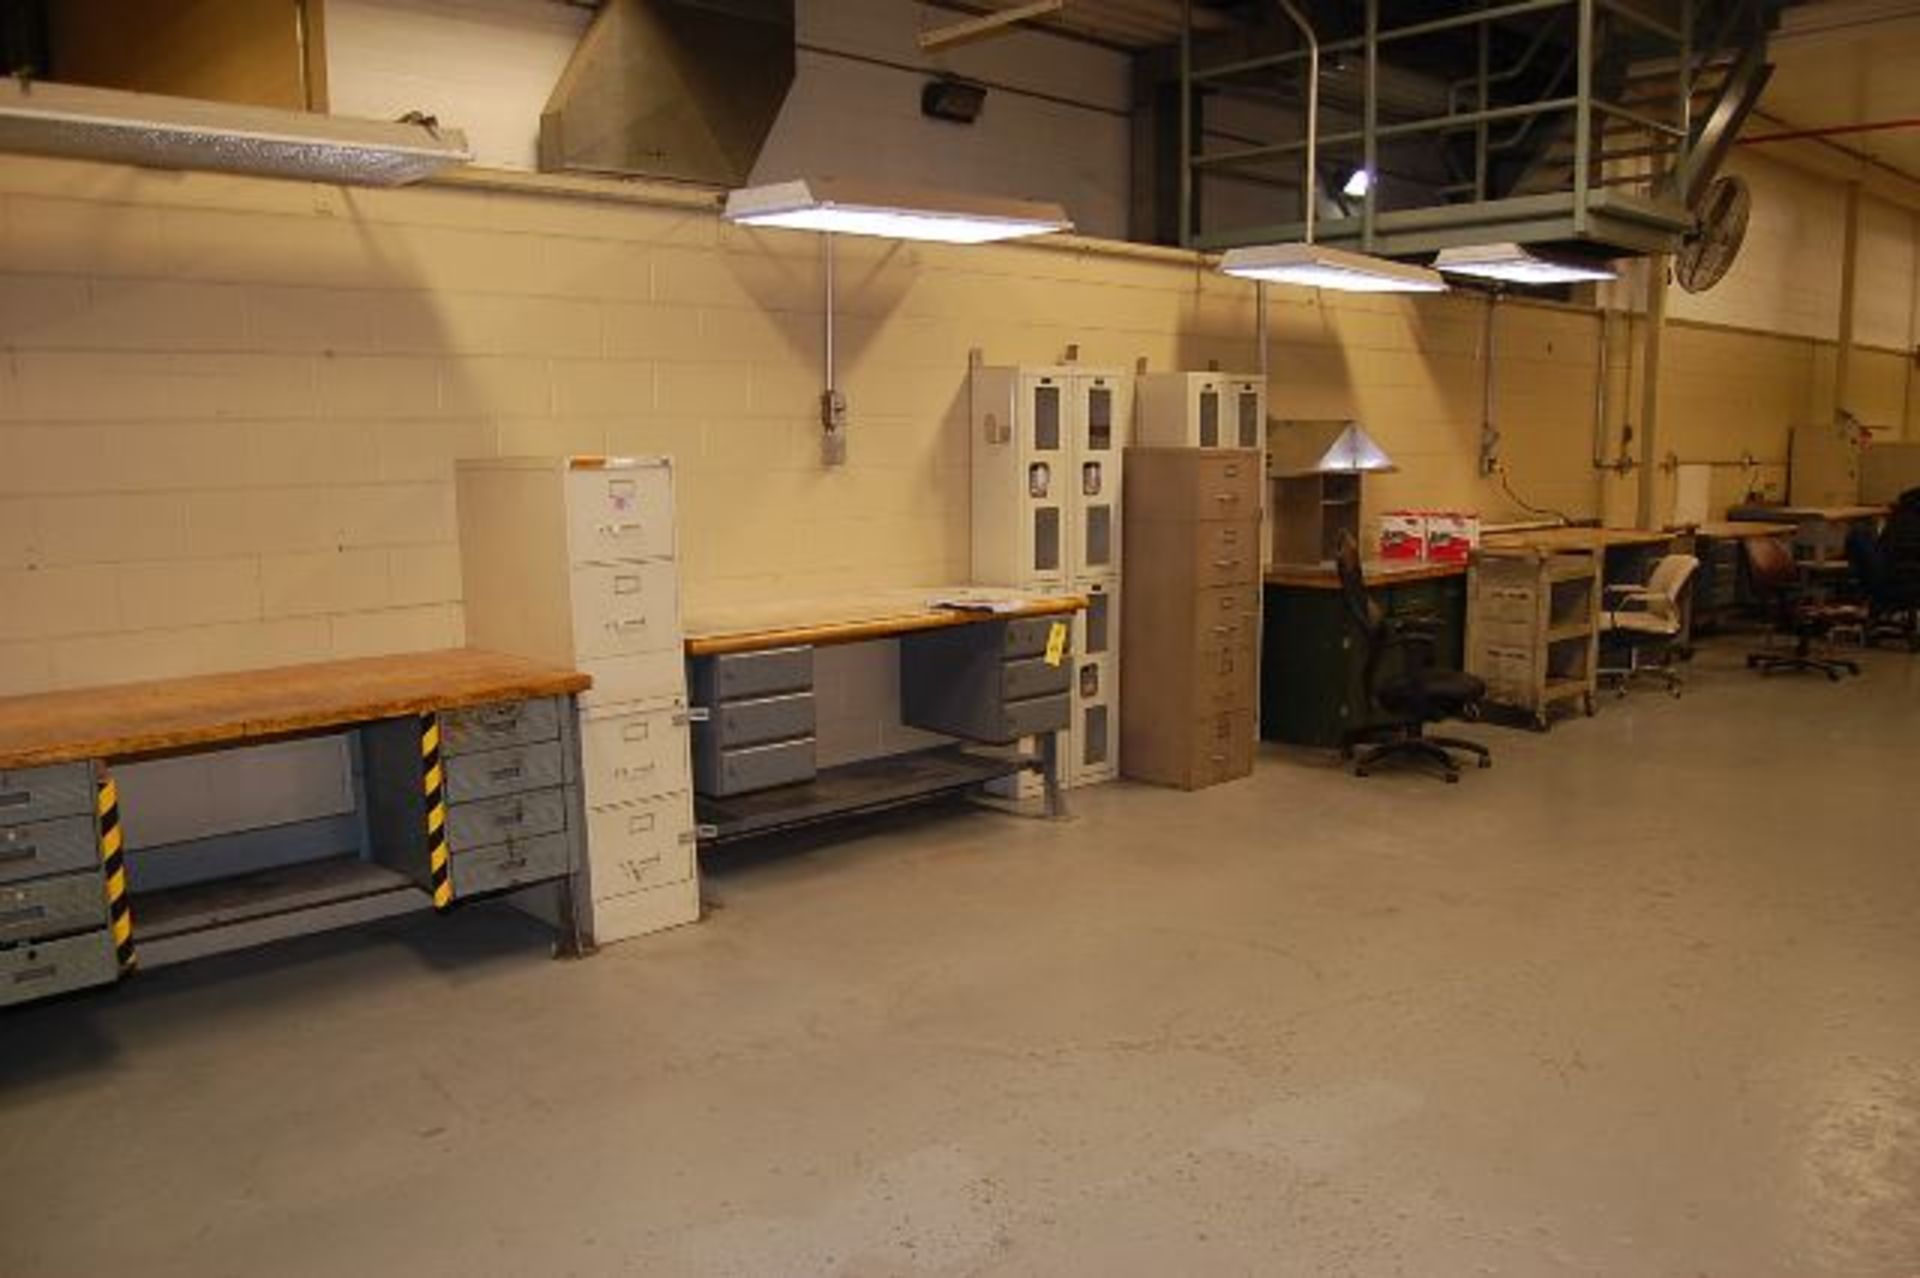 Shop Support Items - Assorted, (13) Work Tables, (3) Hallowell Locker Units, (10) File Cabinets - Image 2 of 4